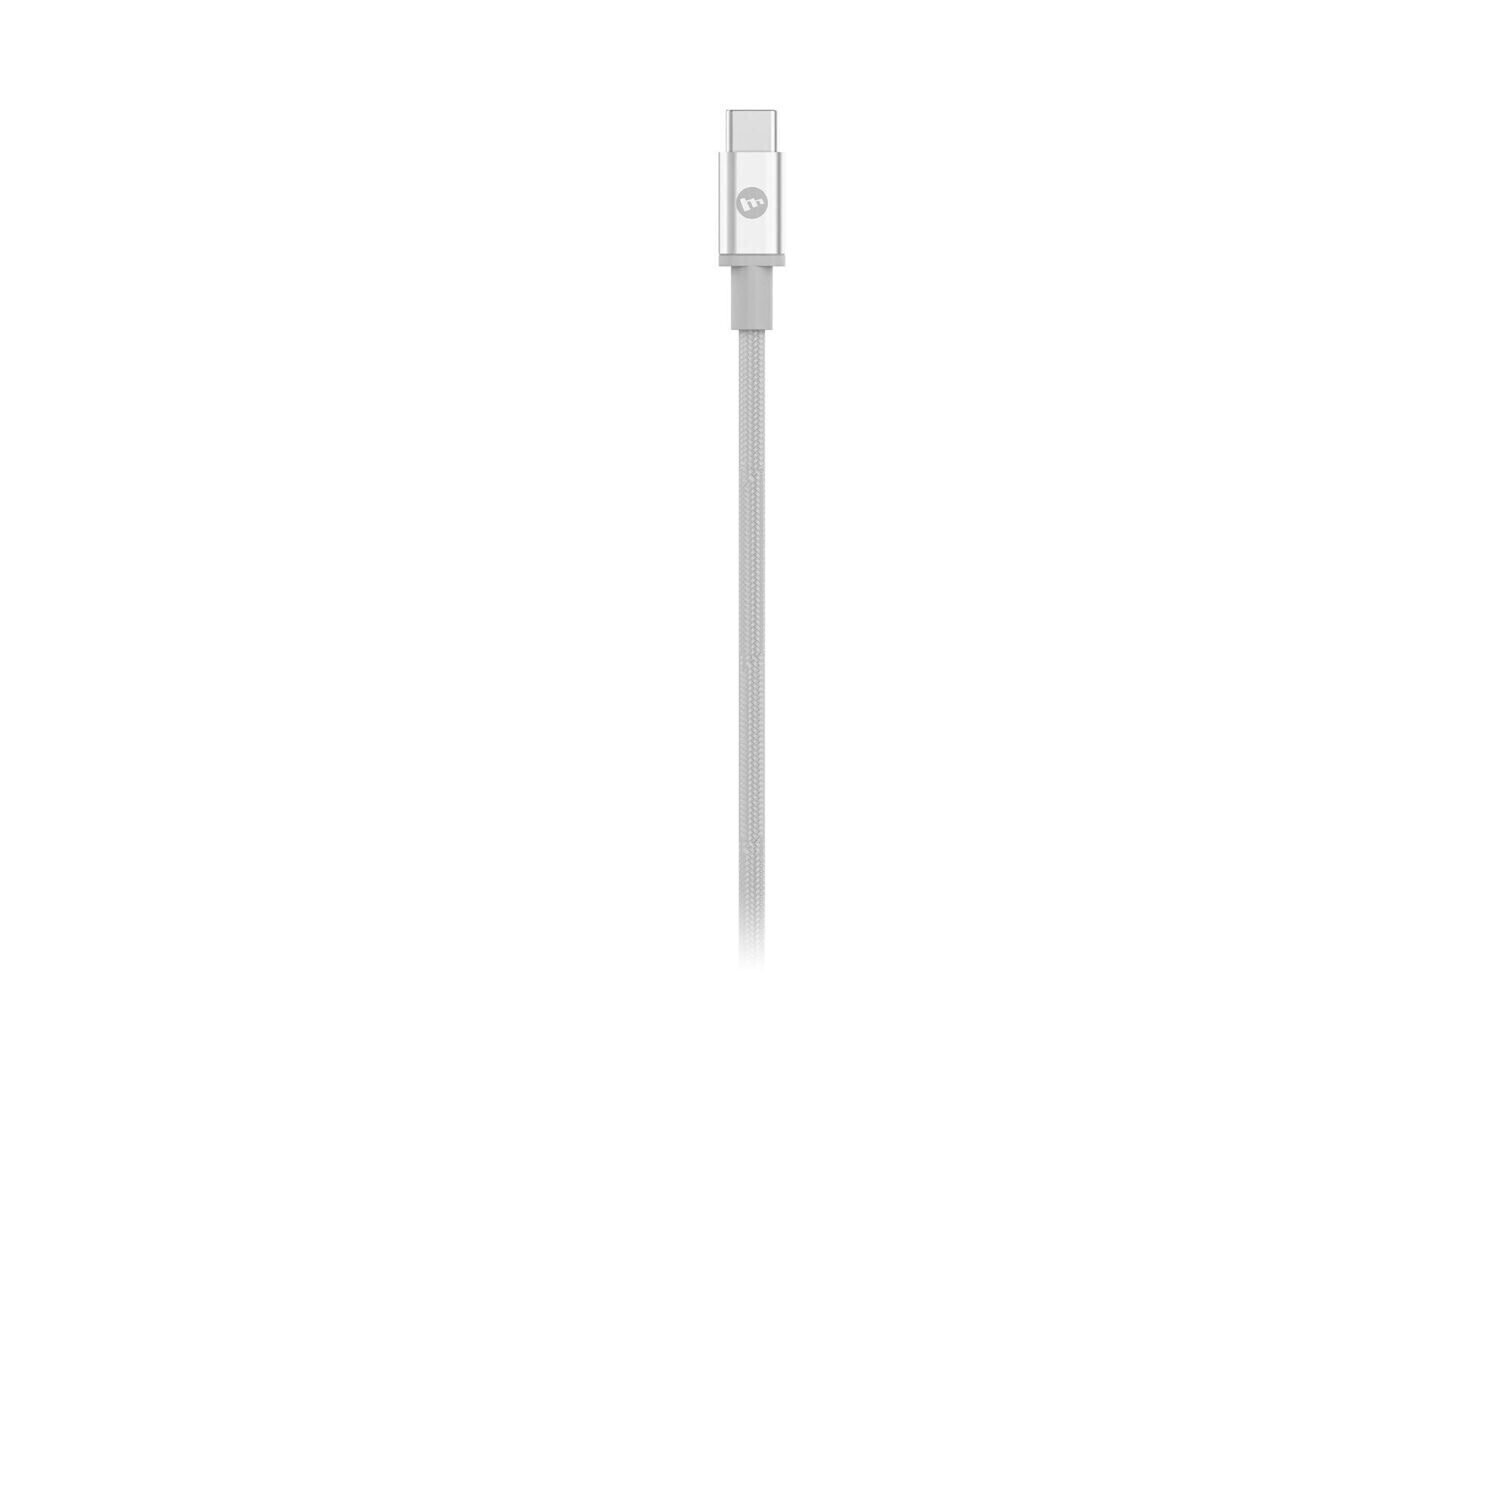 Mophie Cable USB-C to USB-C (1.5 Meter), White